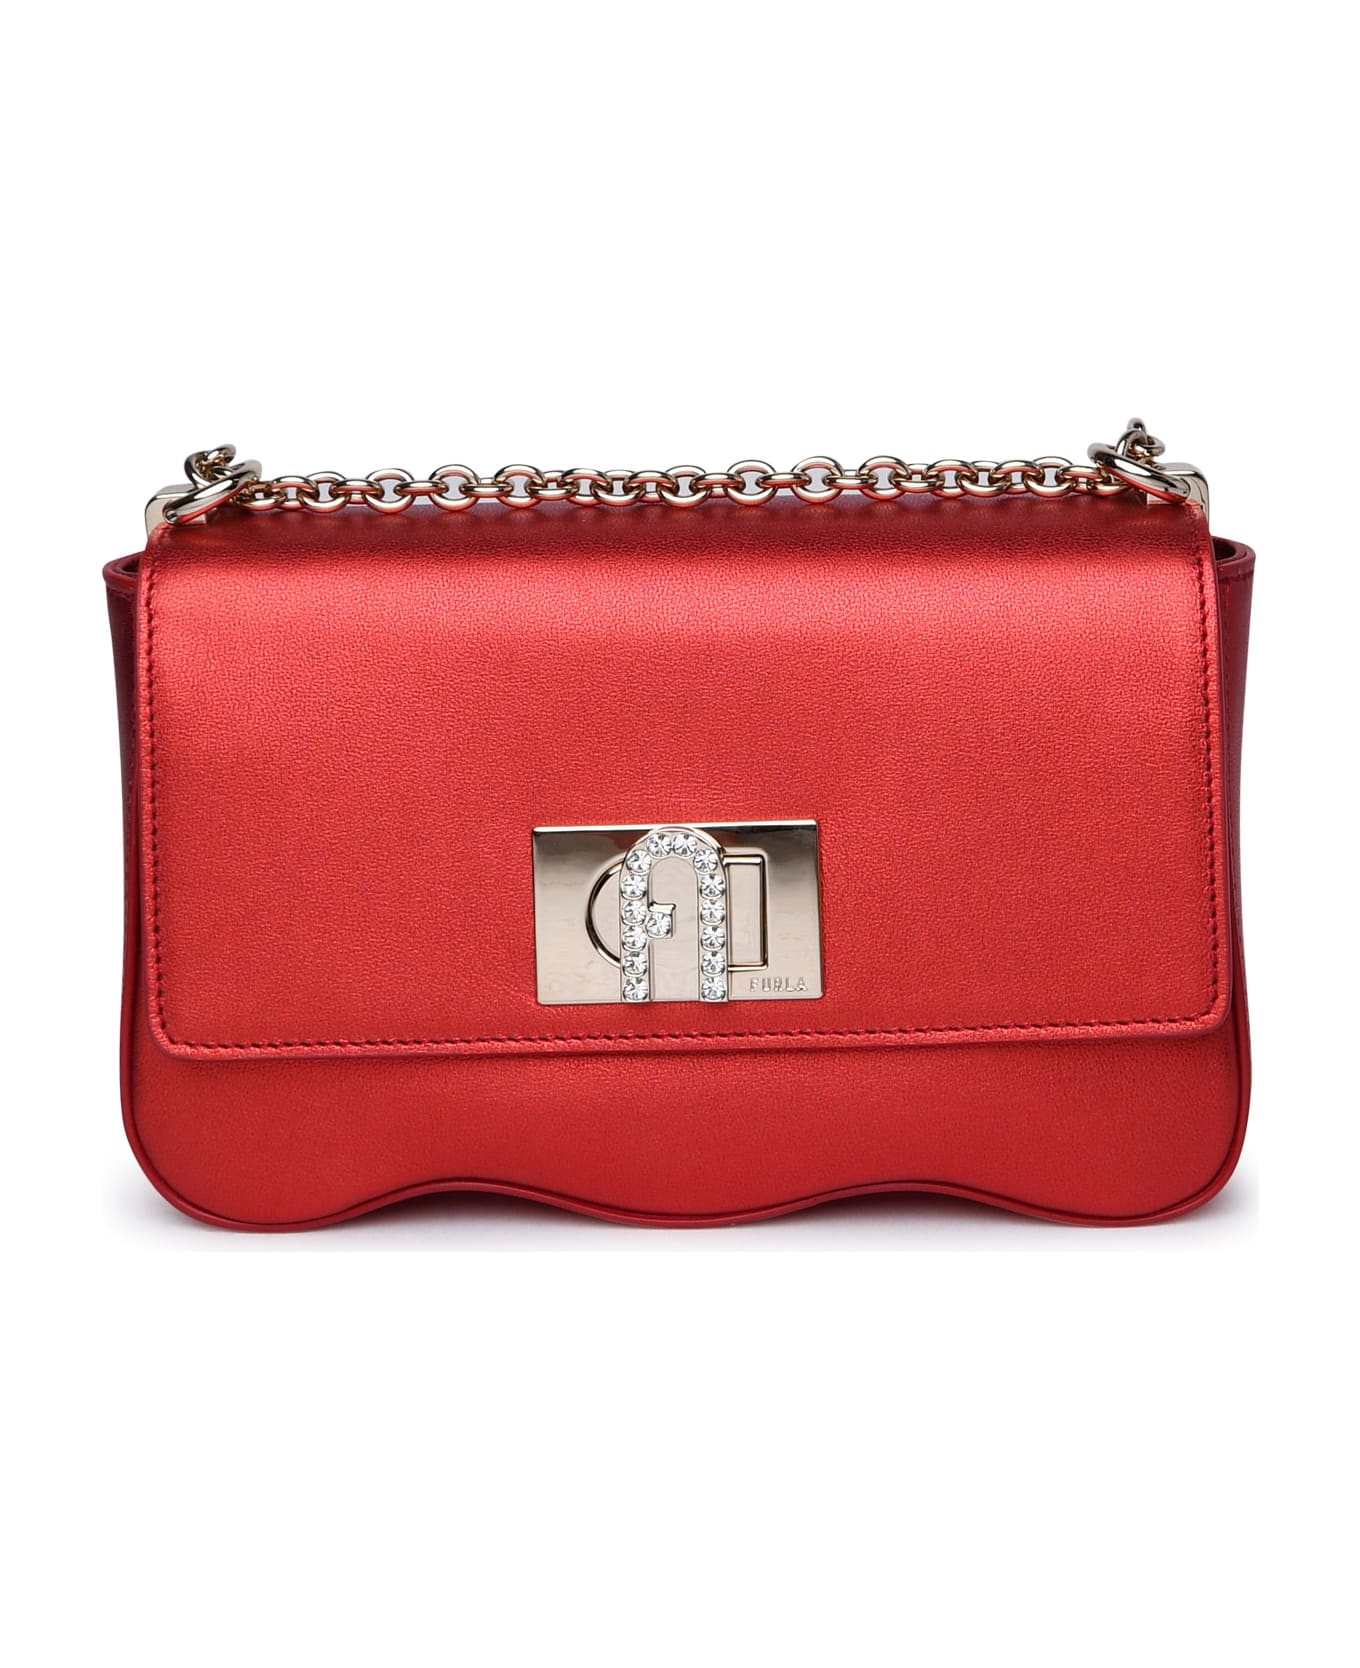 Furla Red Leather Bag - Red ショルダーバッグ